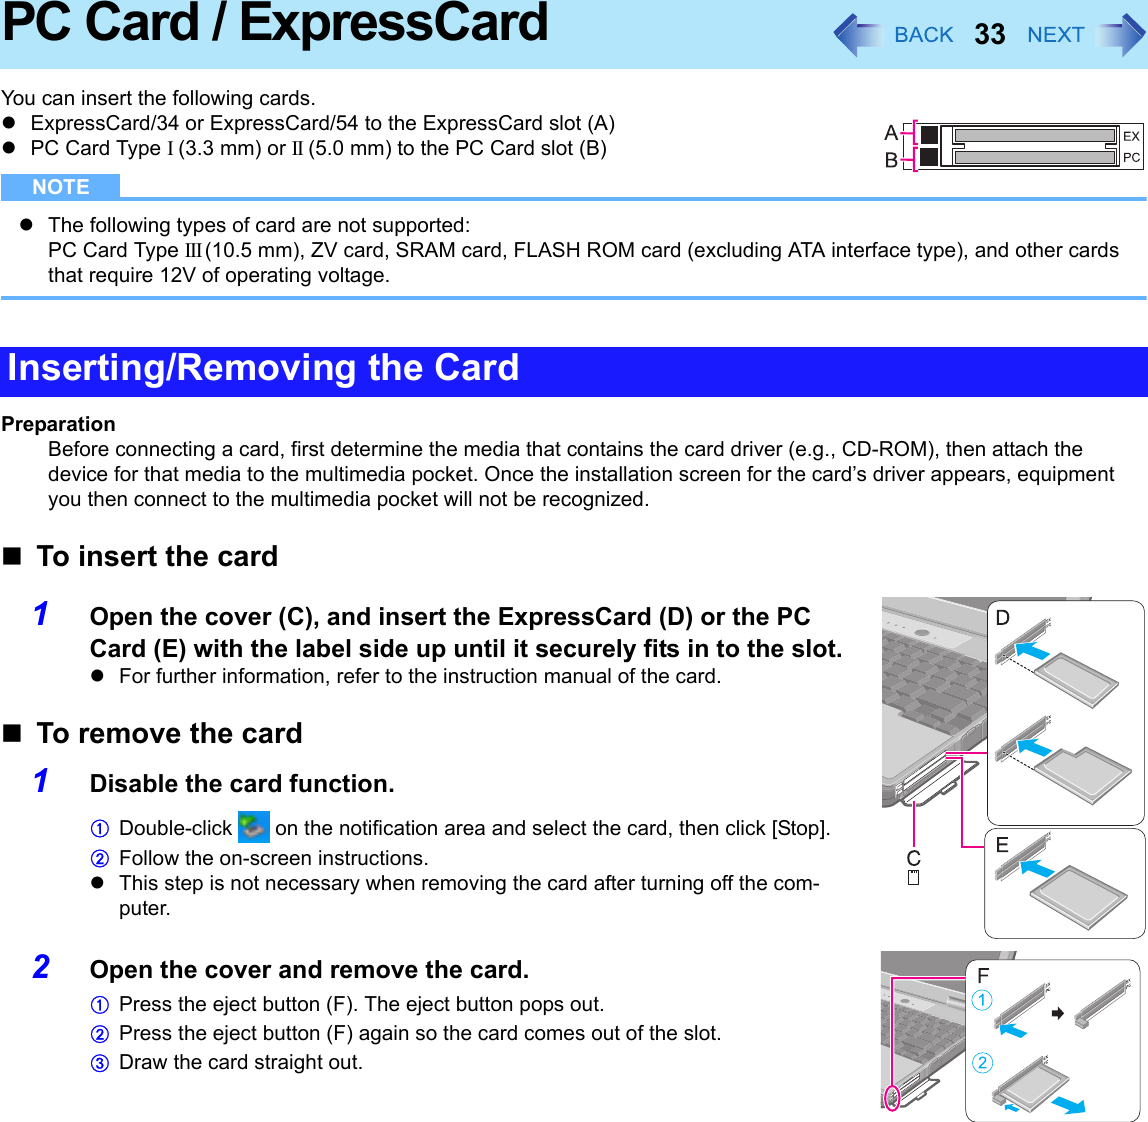 33PC Card / ExpressCardYou can insert the following cards.zExpressCard/34 or ExpressCard/54 to the ExpressCard slot (A)zPC Card Type I (3.3 mm) or II (5.0 mm) to the PC Card slot (B)NOTEzThe following types of card are not supported: PC Card Type III (10.5 mm), ZV card, SRAM card, FLASH ROM card (excluding ATA interface type), and other cards that require 12V of operating voltage.PreparationBefore connecting a card, first determine the media that contains the card driver (e.g., CD-ROM), then attach the device for that media to the multimedia pocket. Once the installation screen for the card’s driver appears, equipment you then connect to the multimedia pocket will not be recognized.To insert the card1Open the cover (C), and insert the ExpressCard (D) or the PC Card (E) with the label side up until it securely fits in to the slot.zFor further information, refer to the instruction manual of the card.To remove the card1Disable the card function.ADouble-click   on the notification area and select the card, then click [Stop].BFollow the on-screen instructions.zThis step is not necessary when removing the card after turning off the com-puter.2Open the cover and remove the card.APress the eject button (F). The eject button pops out.BPress the eject button (F) again so the card comes out of the slot.CDraw the card straight out.Inserting/Removing the Card